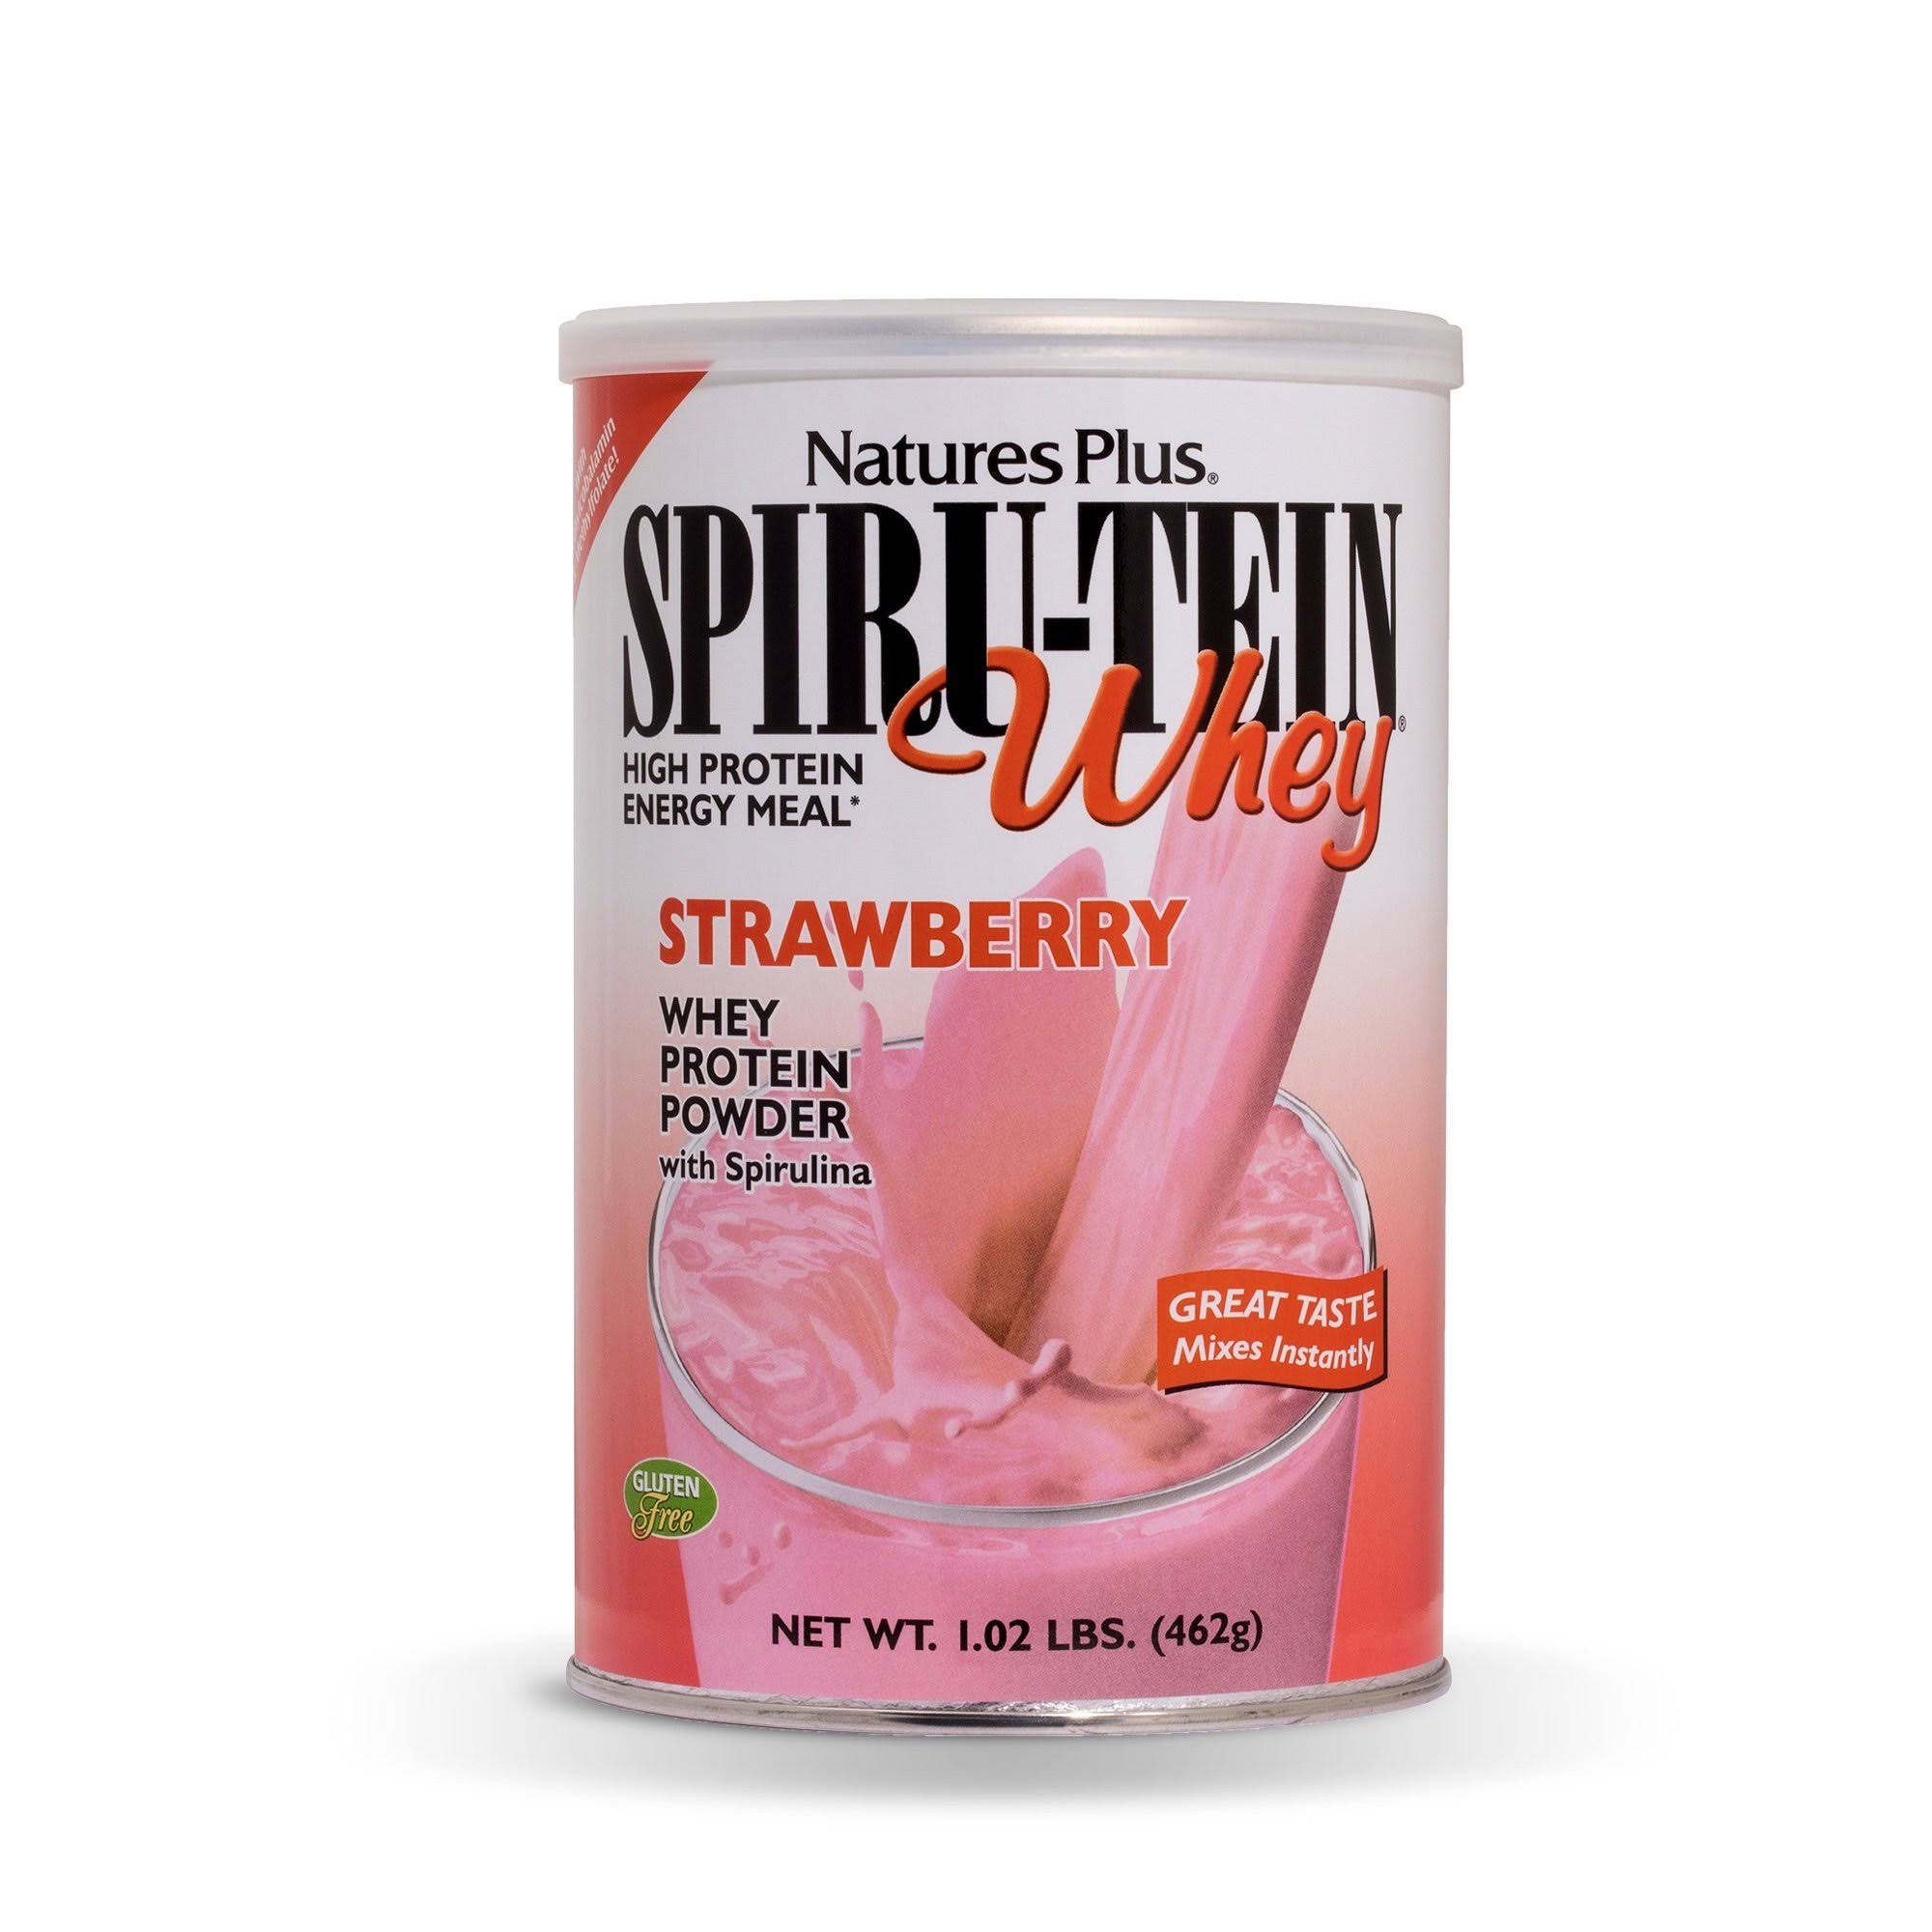 Nature's Plus Spiru-tein Whey High Protein Energy Meal - Strawberry, 490g